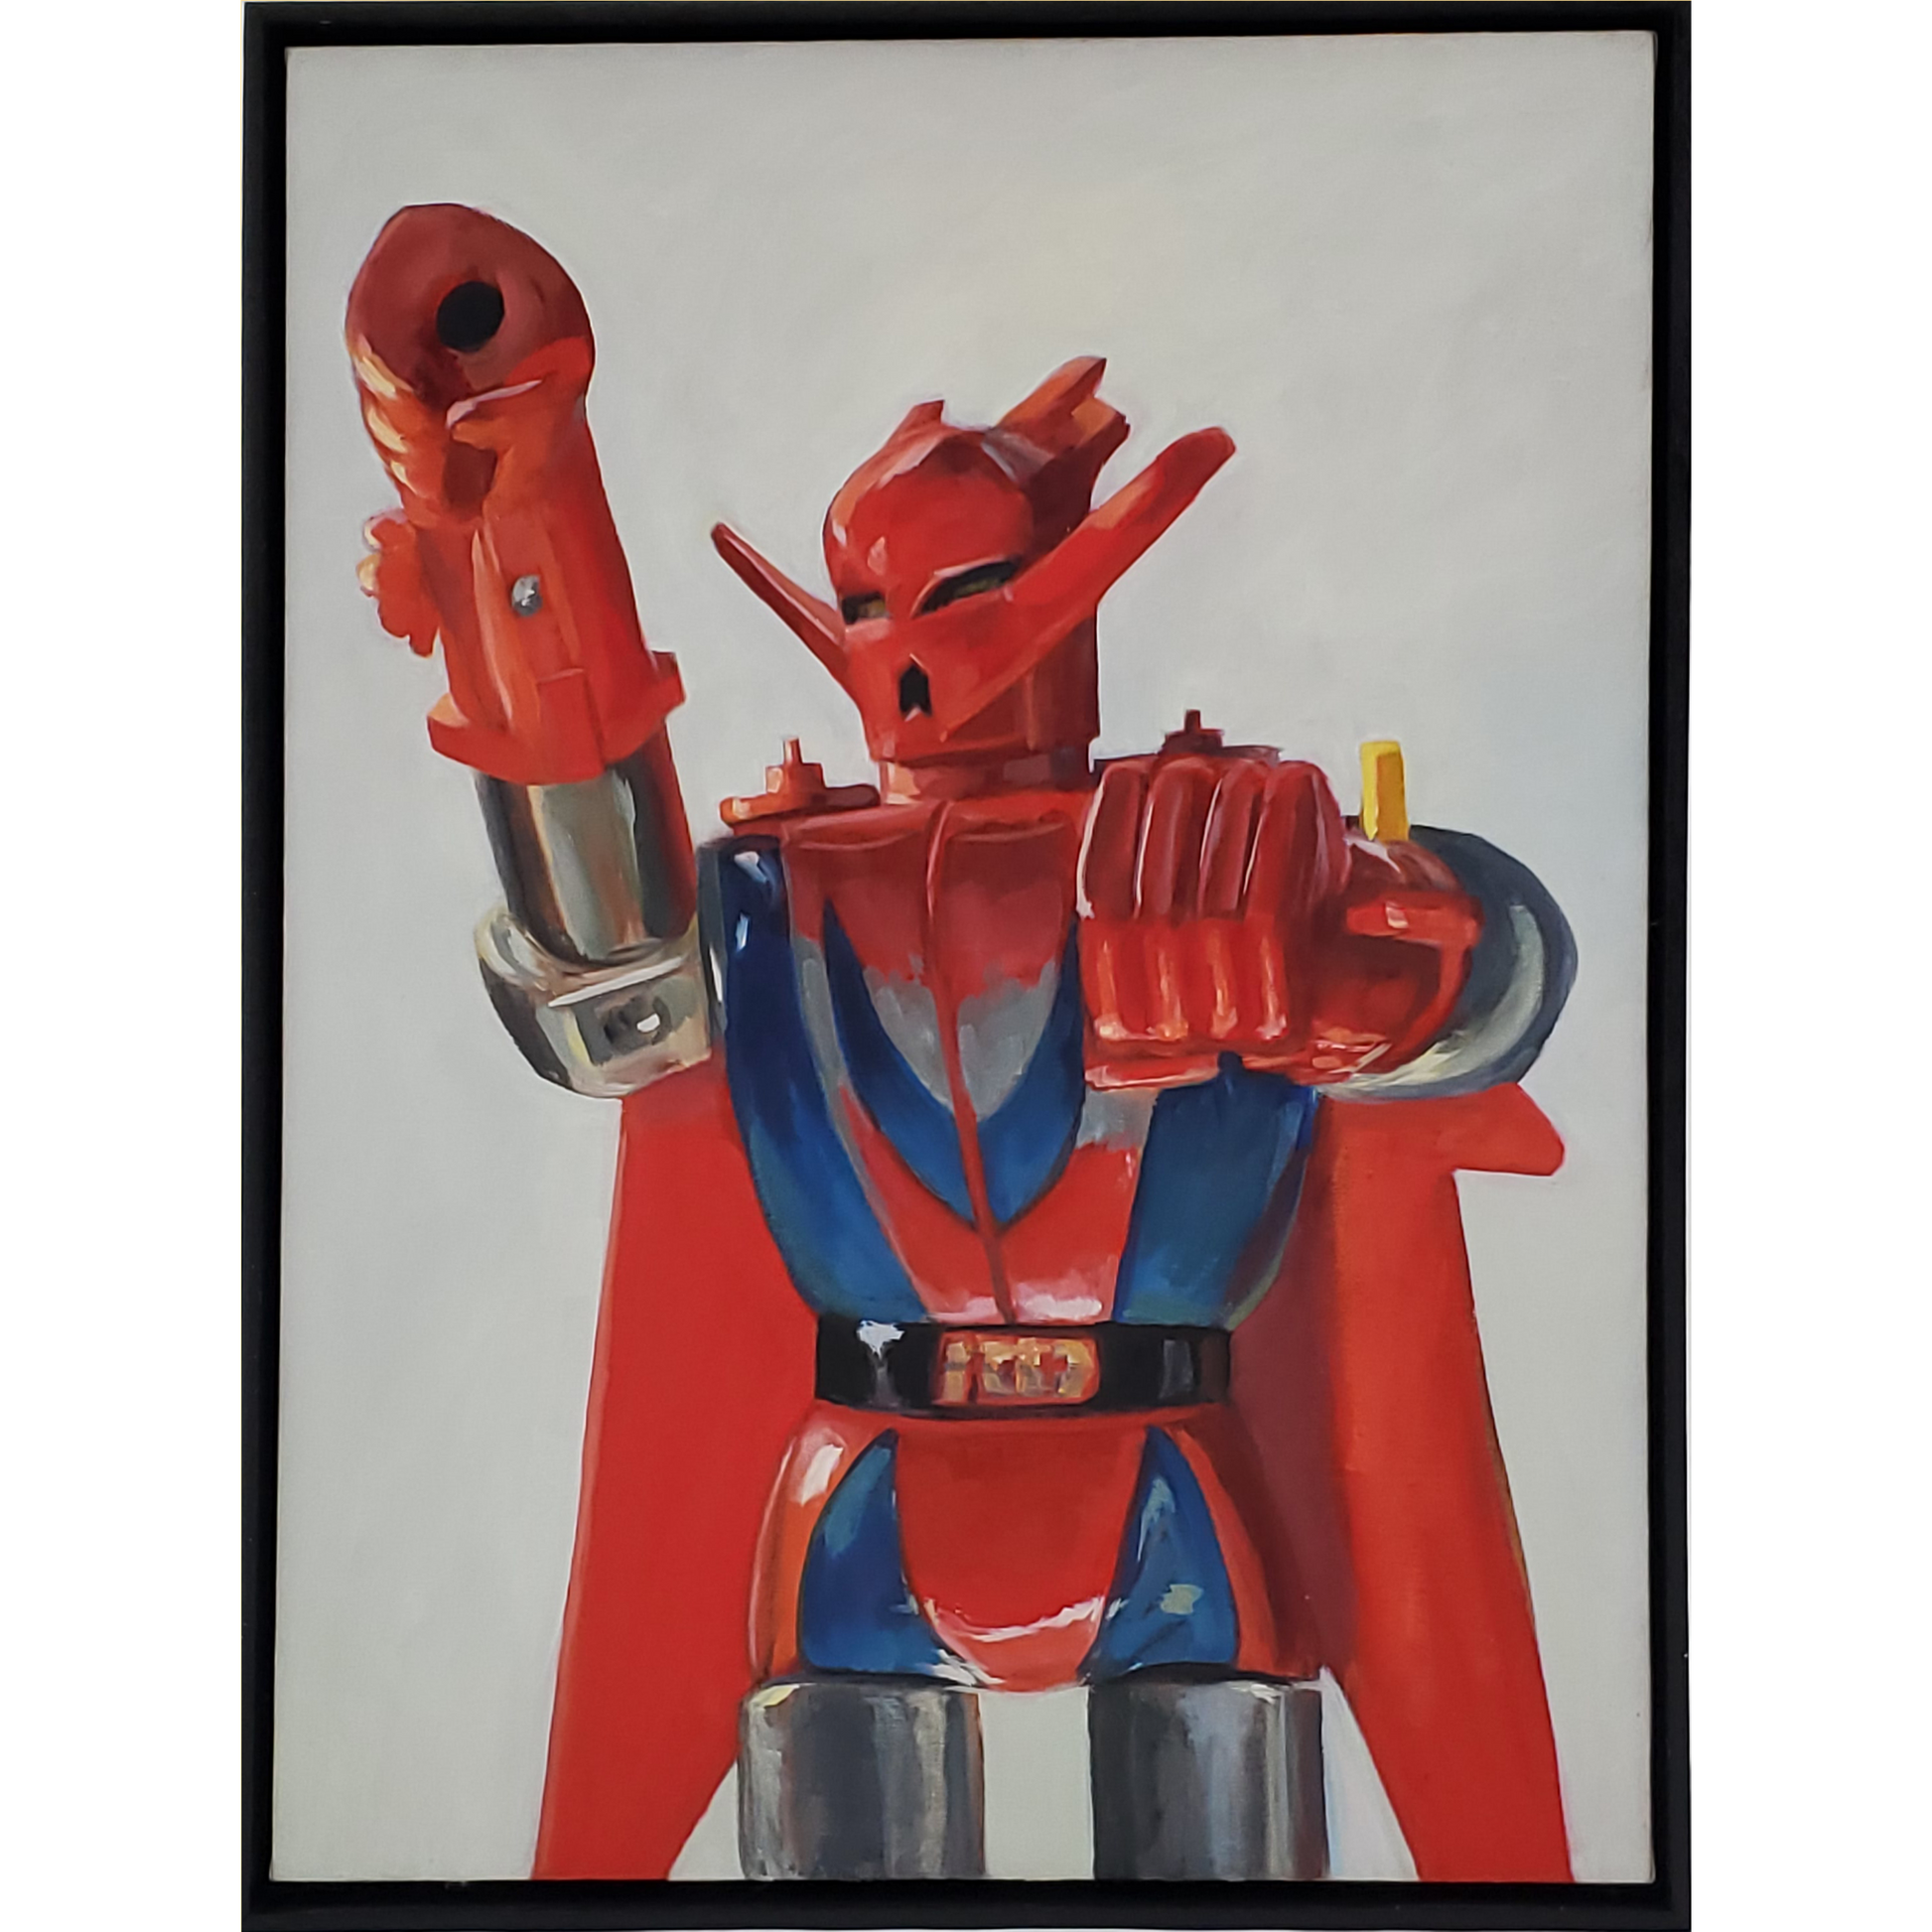 Red Original Robot Painting Oil on Canvas by Kyle La Fever